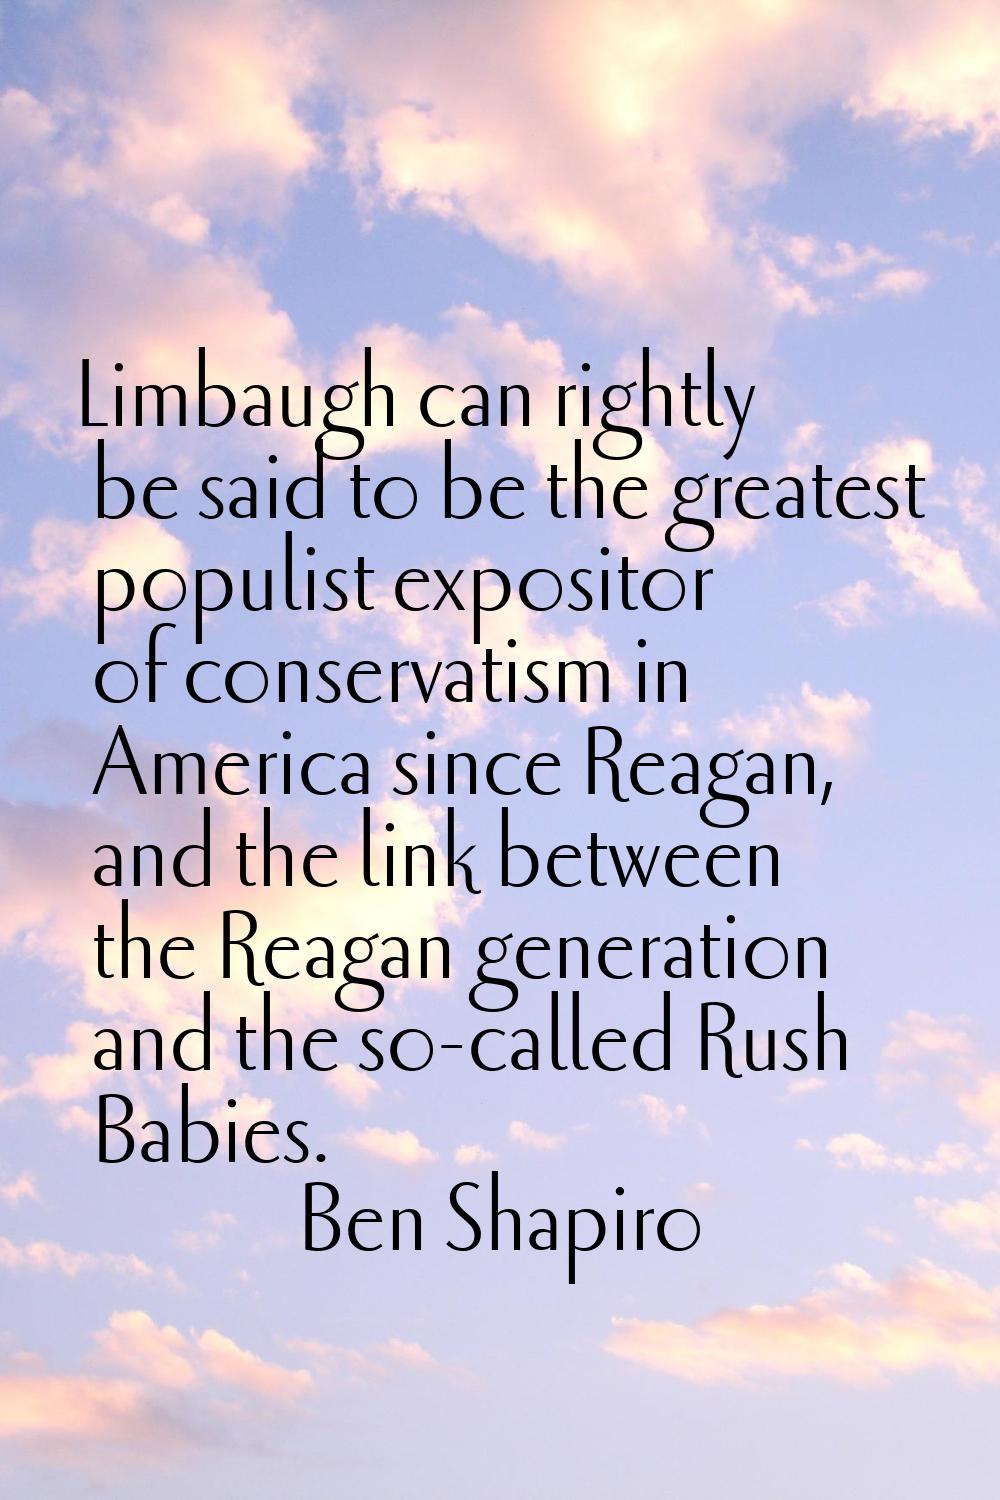 Limbaugh can rightly be said to be the greatest populist expositor of conservatism in America since